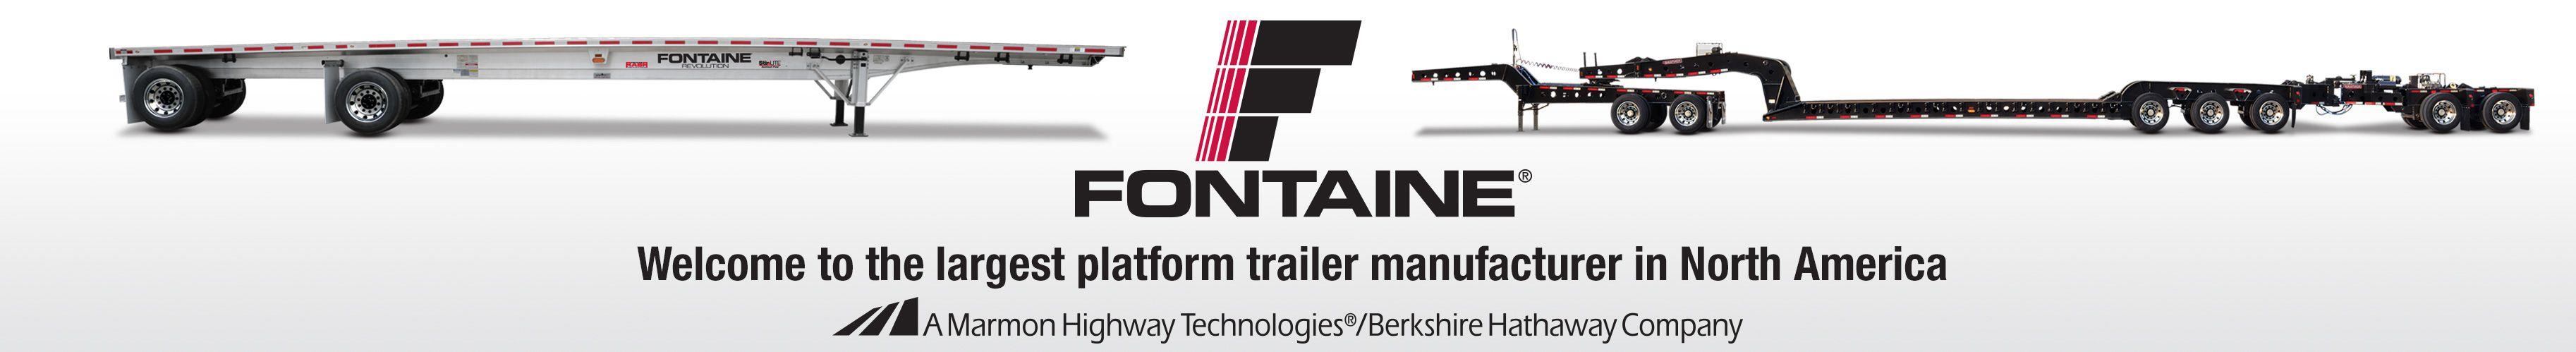 Trailers Logo - Fontaine Trailer, Flatbed Trailers, Flat bed trailers, Drops